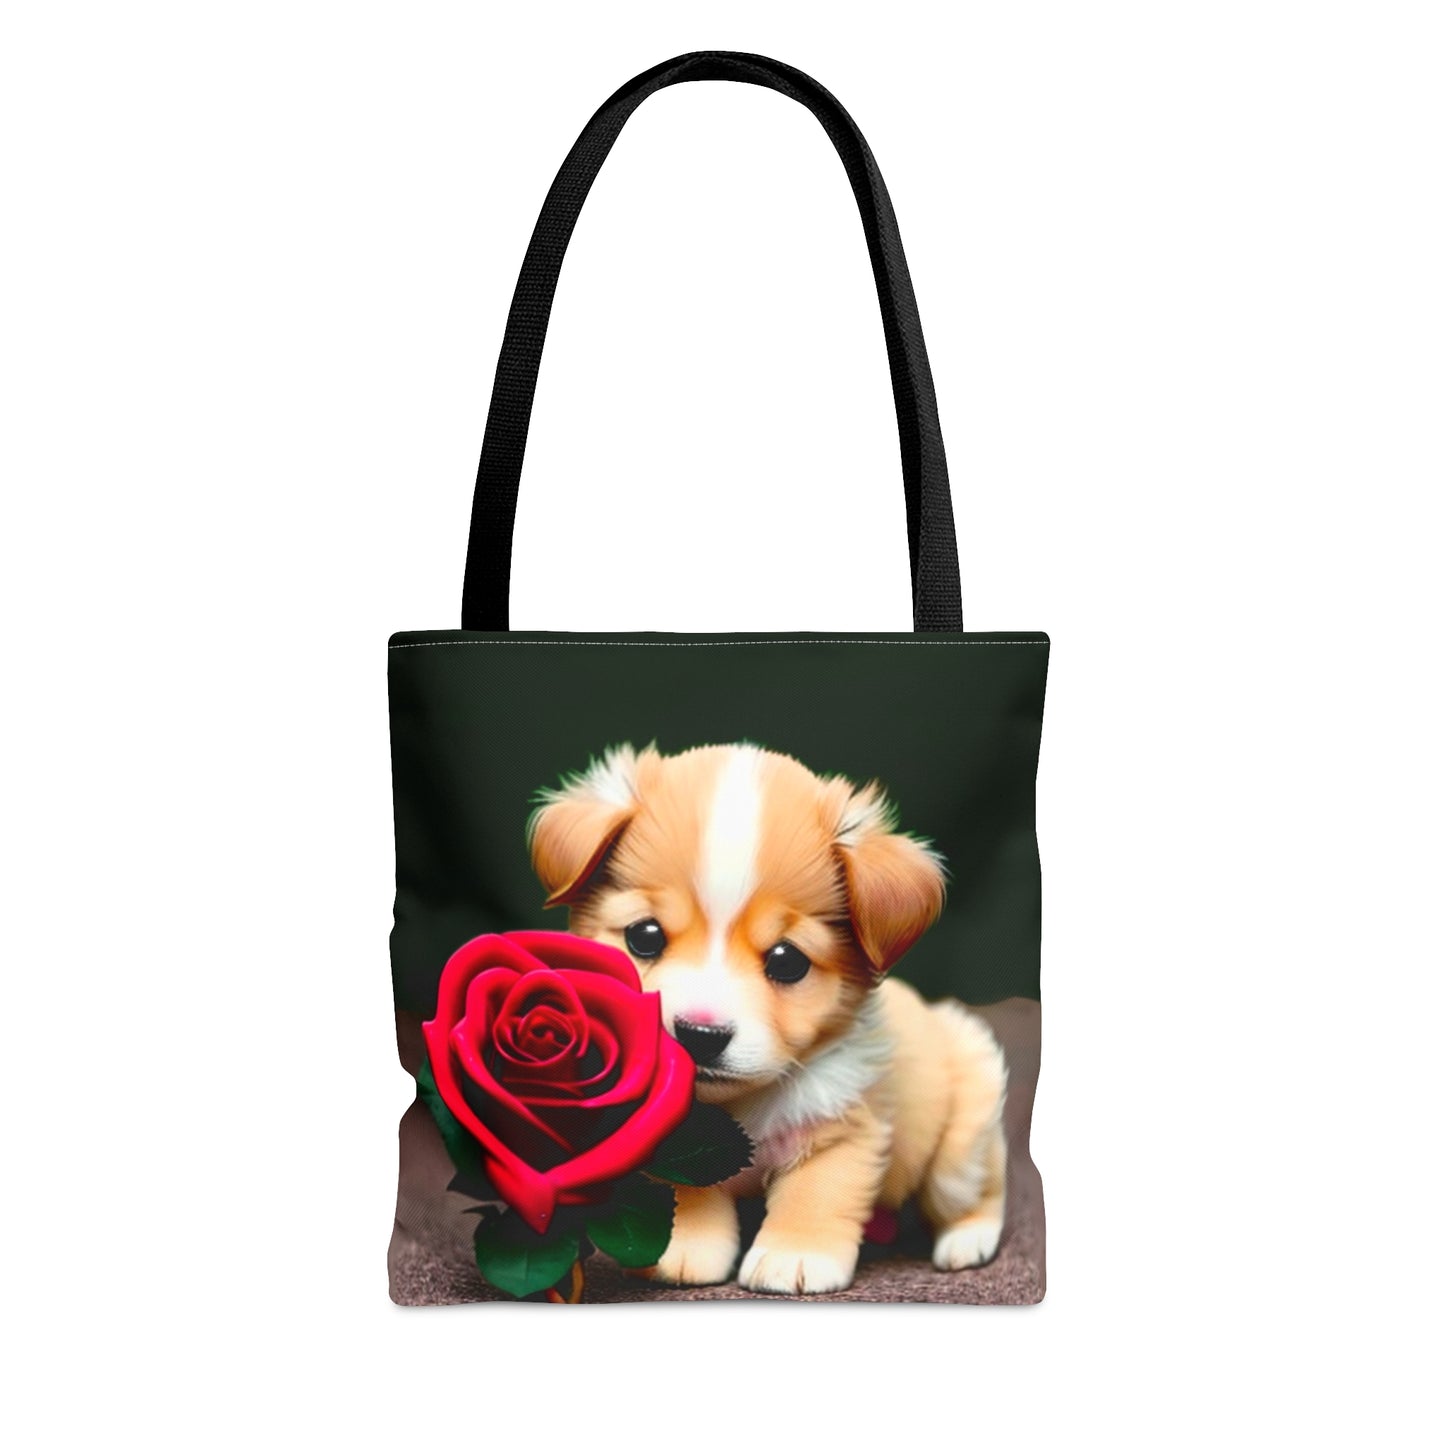 Give a Rose Puppy Tote Bag